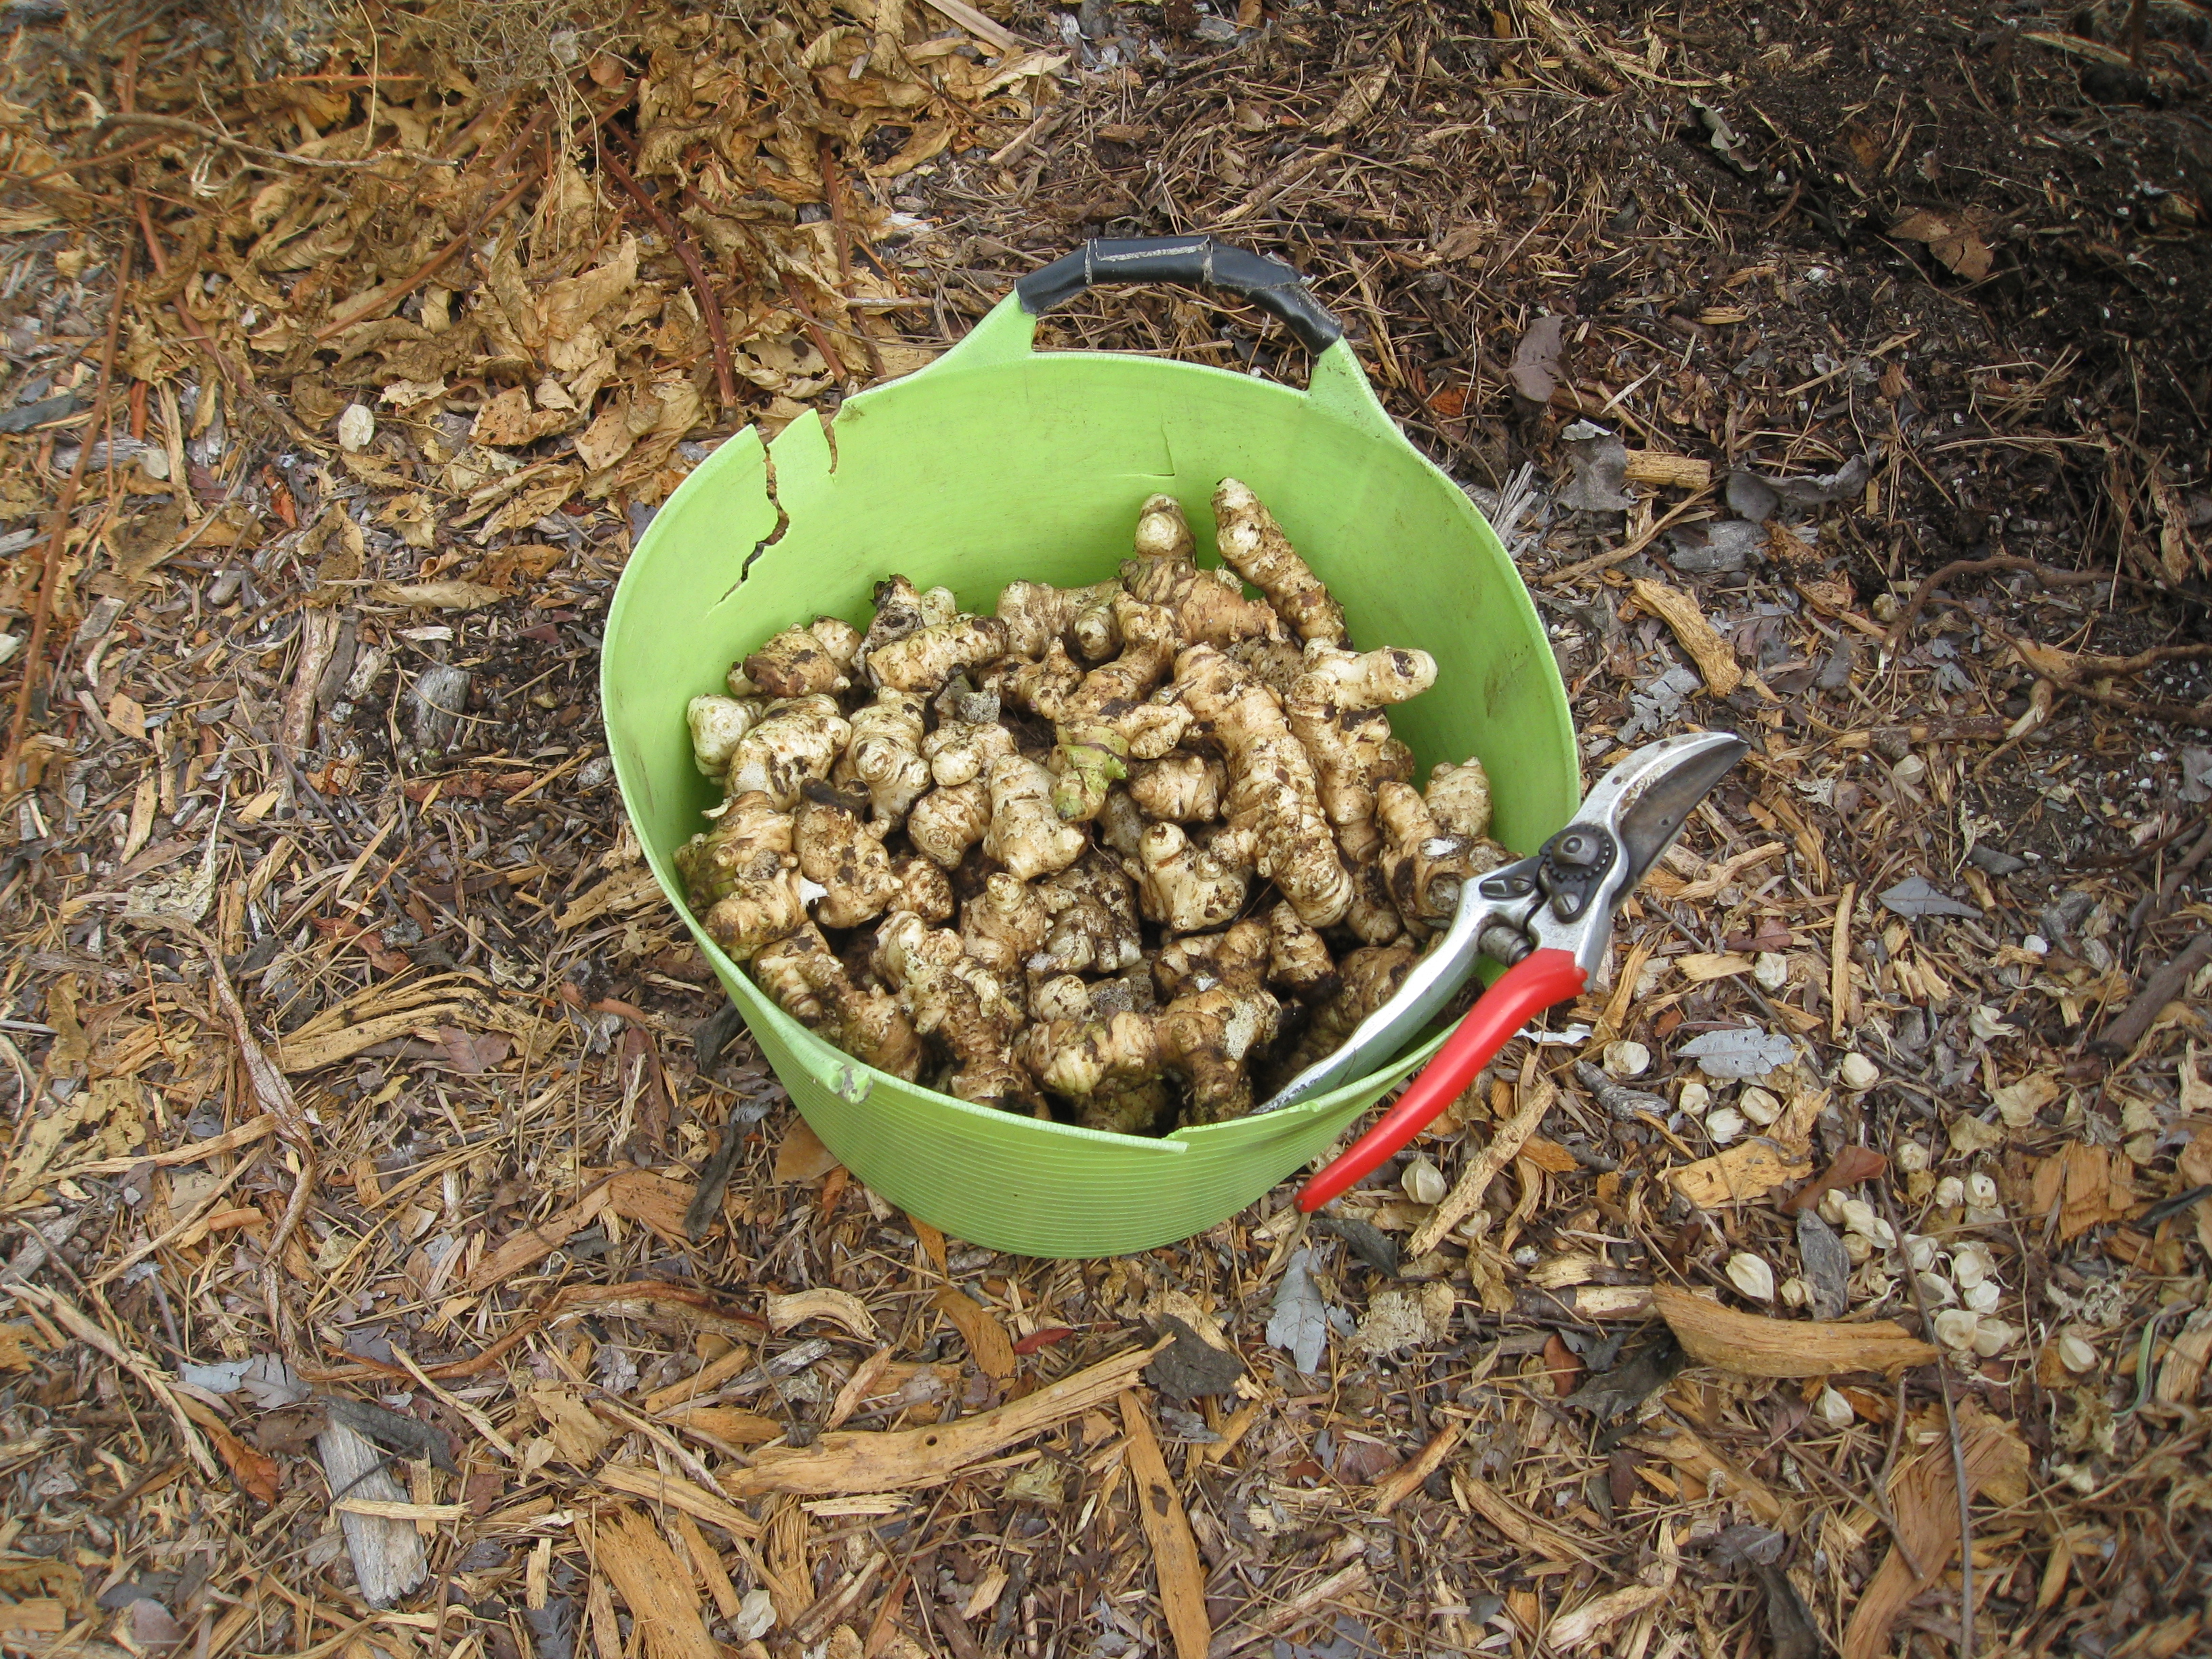 We filled a 3 gallon bucket with the good chokes.